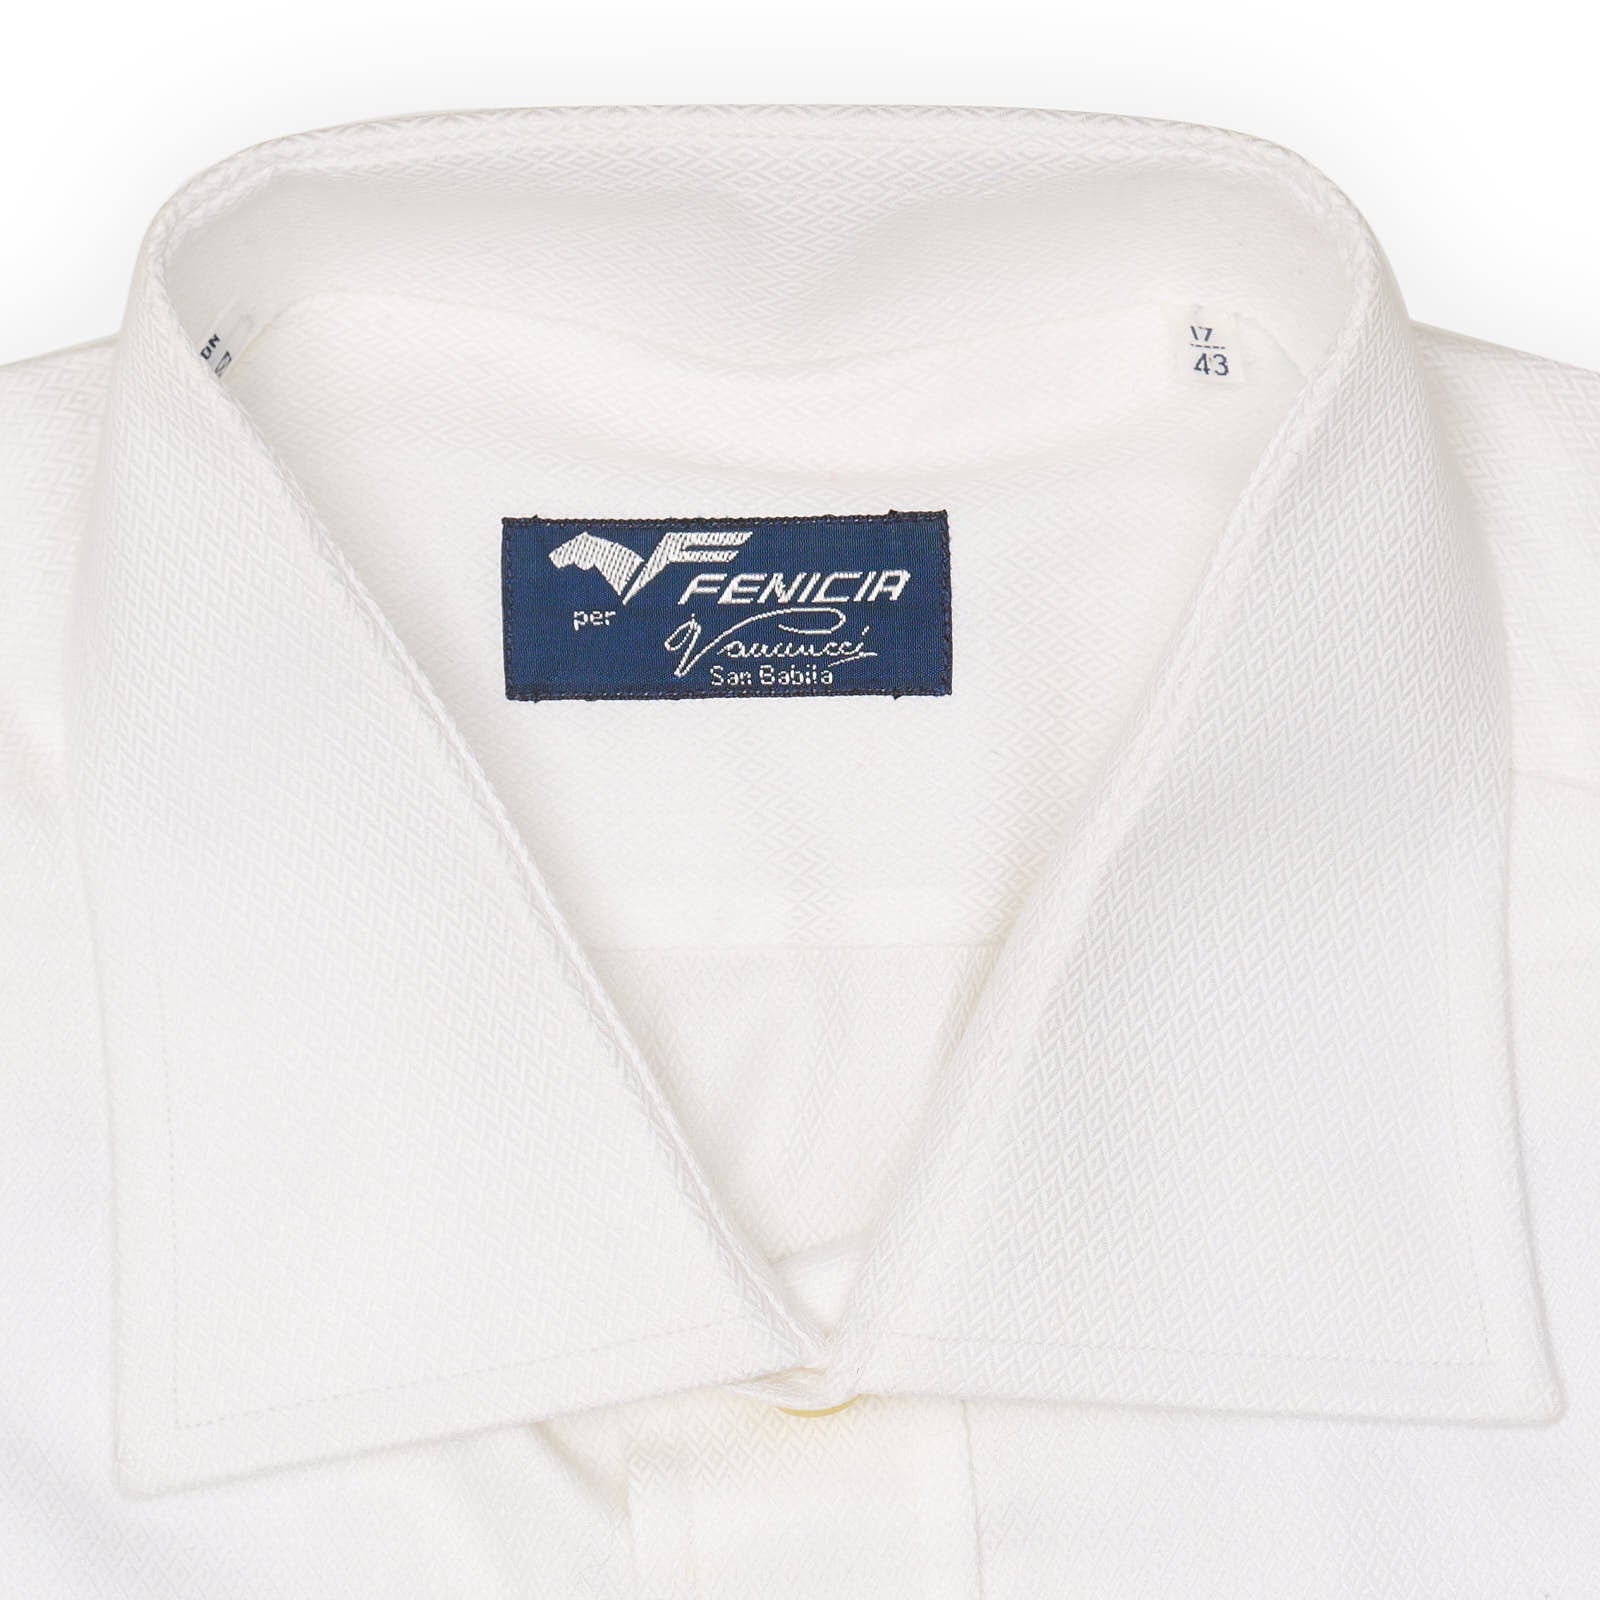 FENICIA for Vannucci Handmade White Dobby Cotton French Cuff Dress Shirt NEW